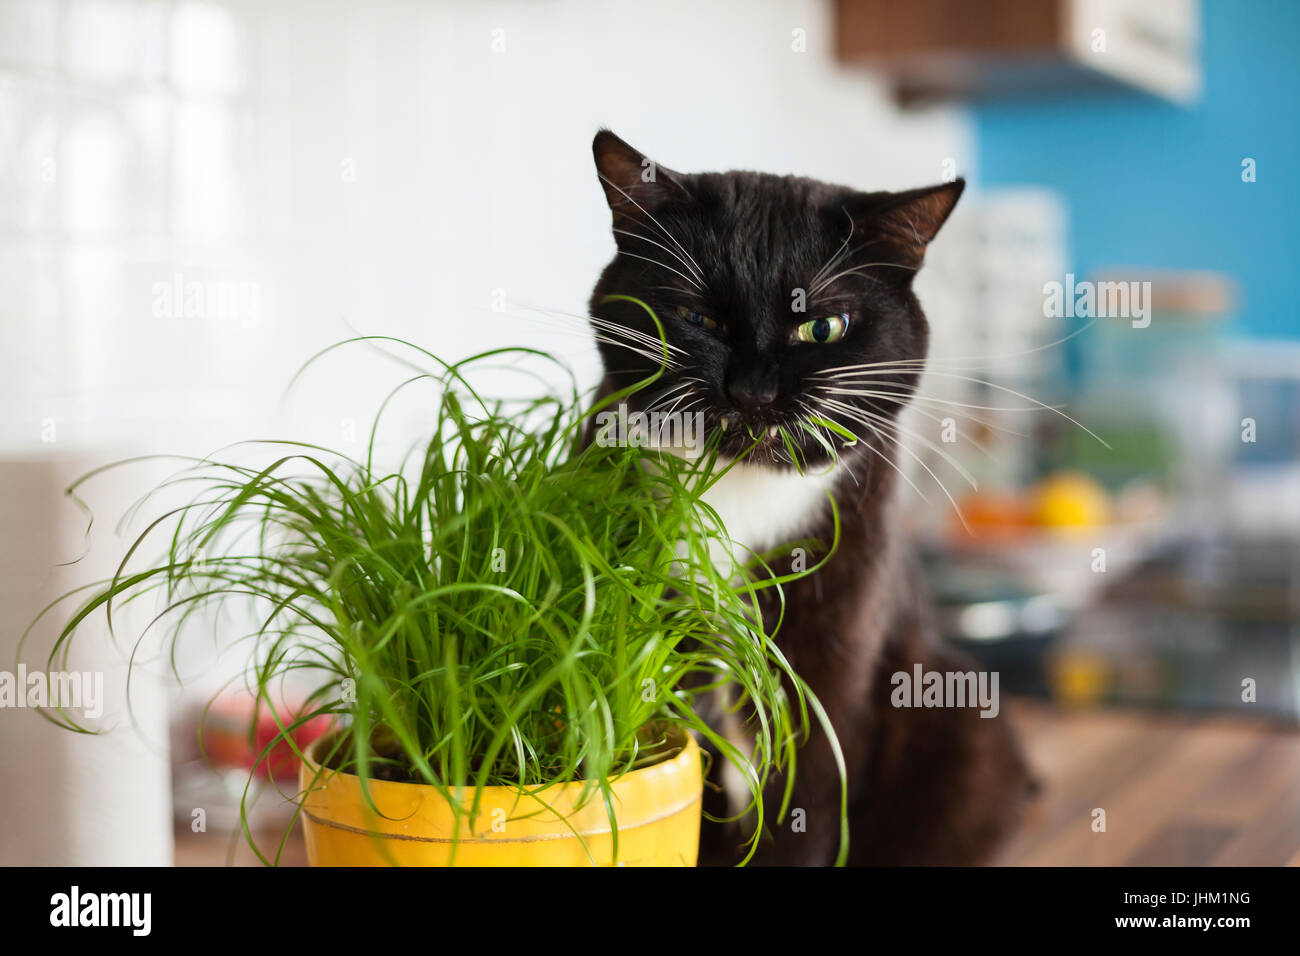 Funny black cat eating cat grass Stock Photo